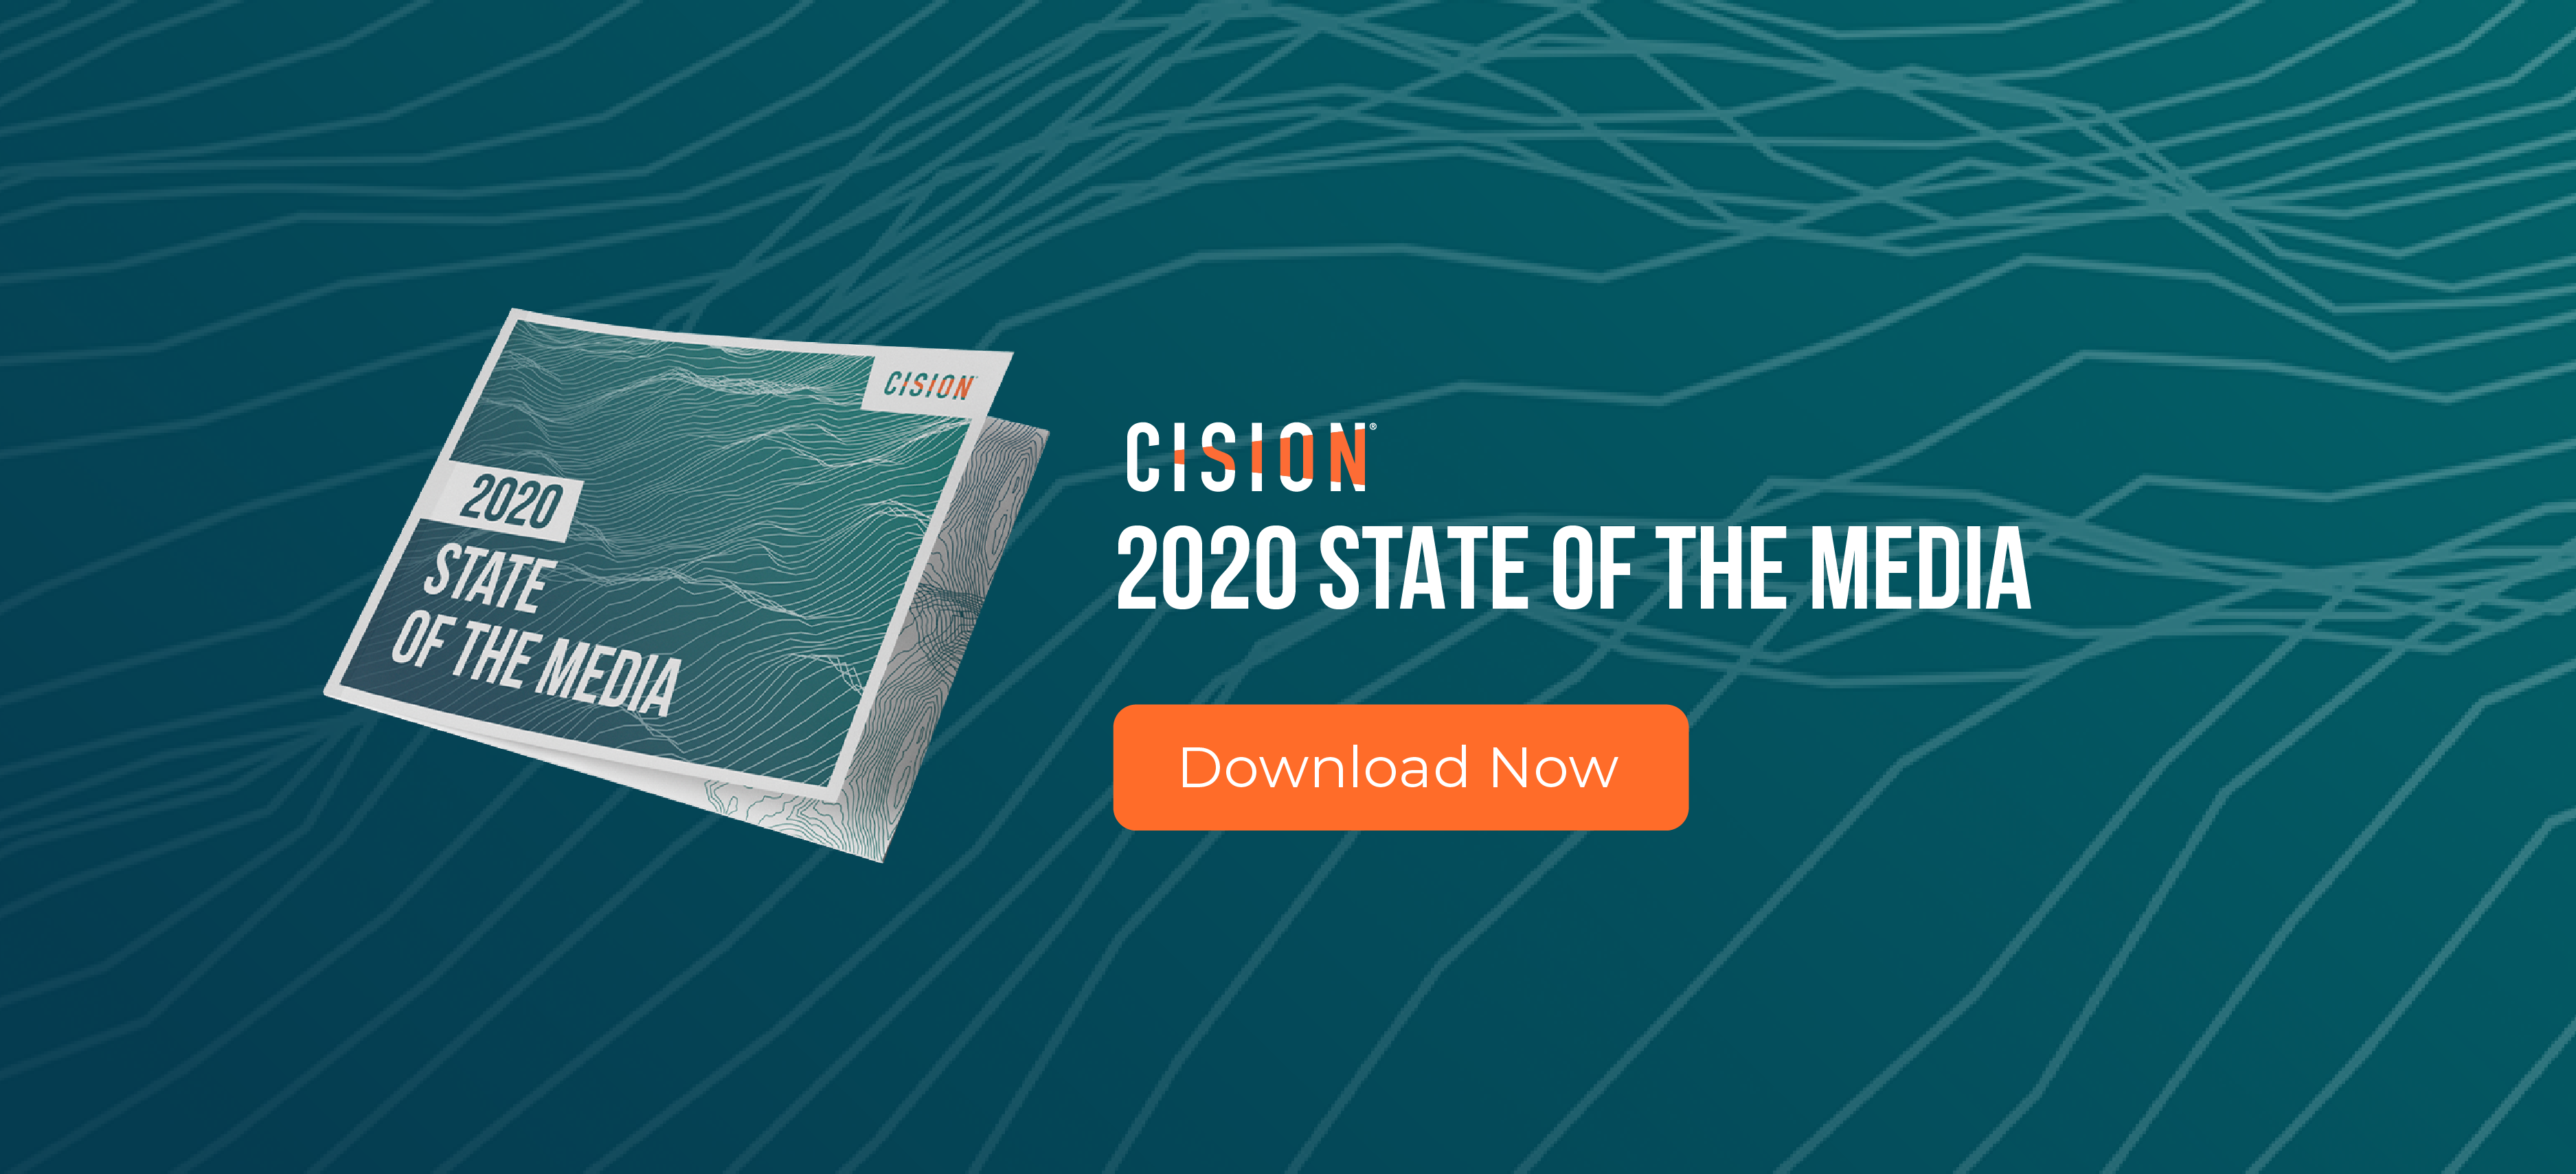 Cision’s 2020 State of the Media Report Top 5 Takeaways for APAC PR